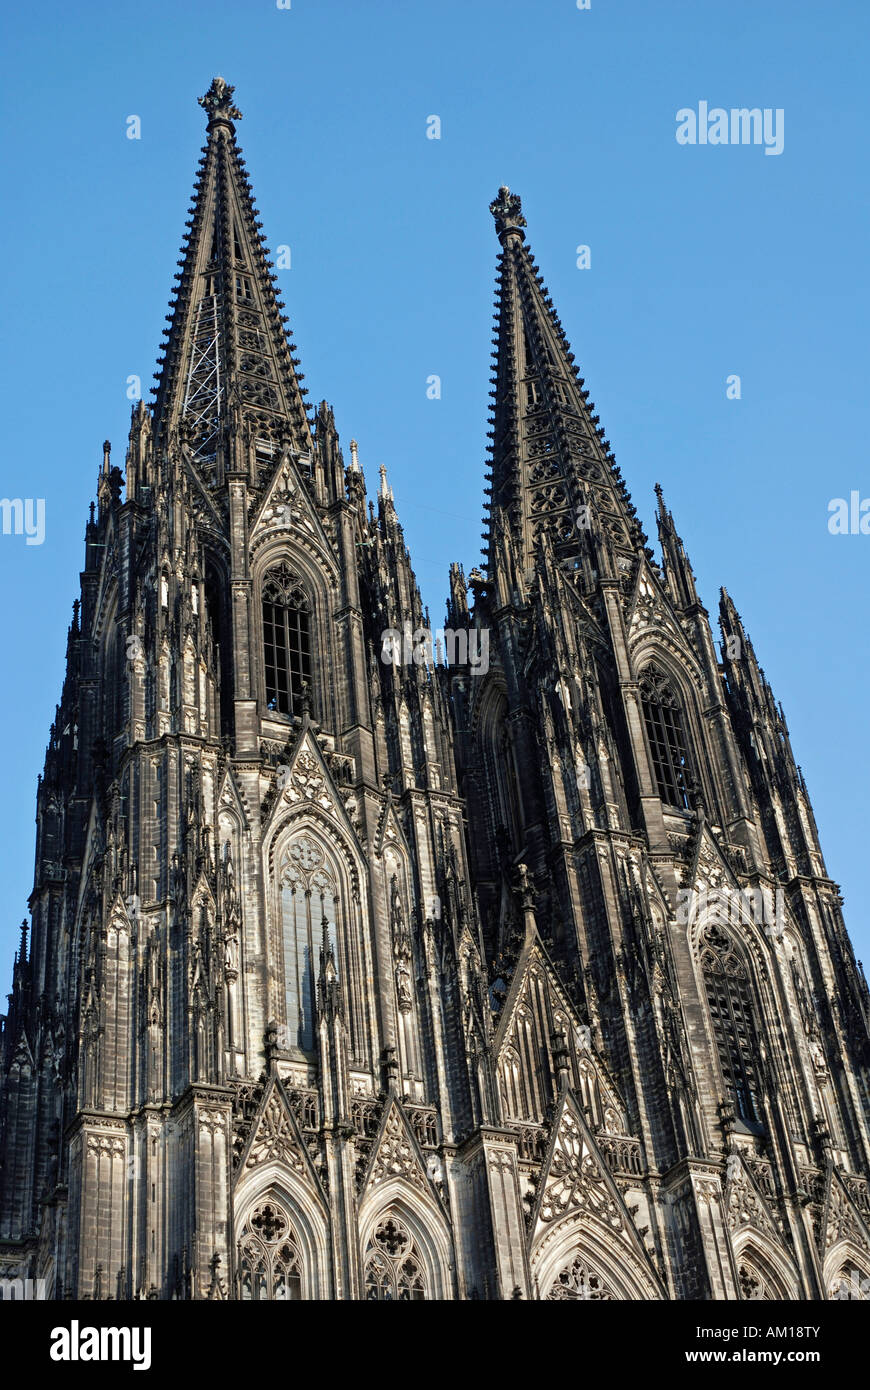 Cologne Cathedrale, Cologne, North Rhine-Westphalia, Germany Stock Photo